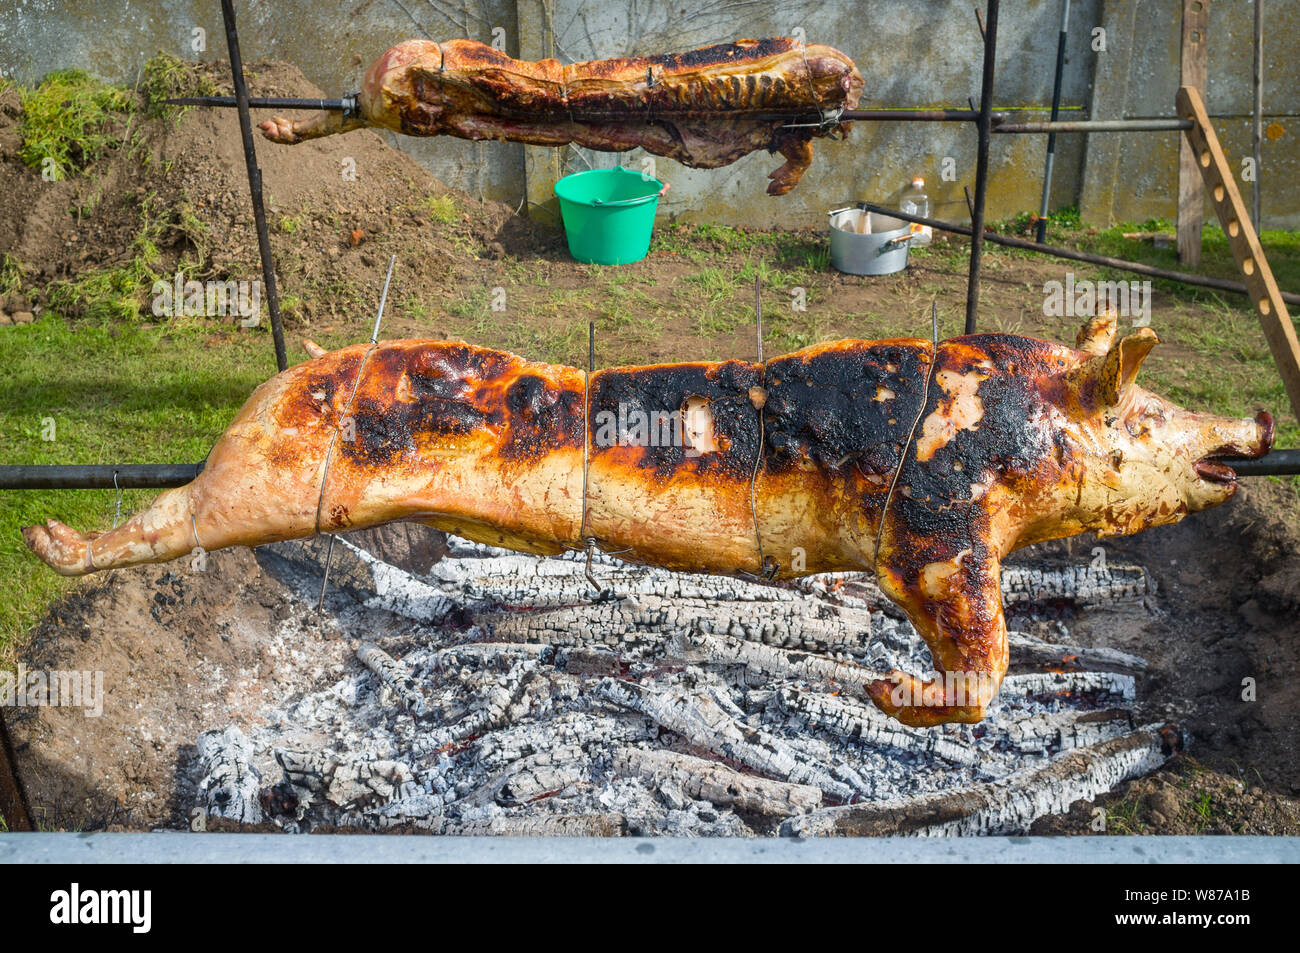 A roasted pig on a spit over wood embers at a traditional fair or Foire a Tout in Normandy, France Stock Photo